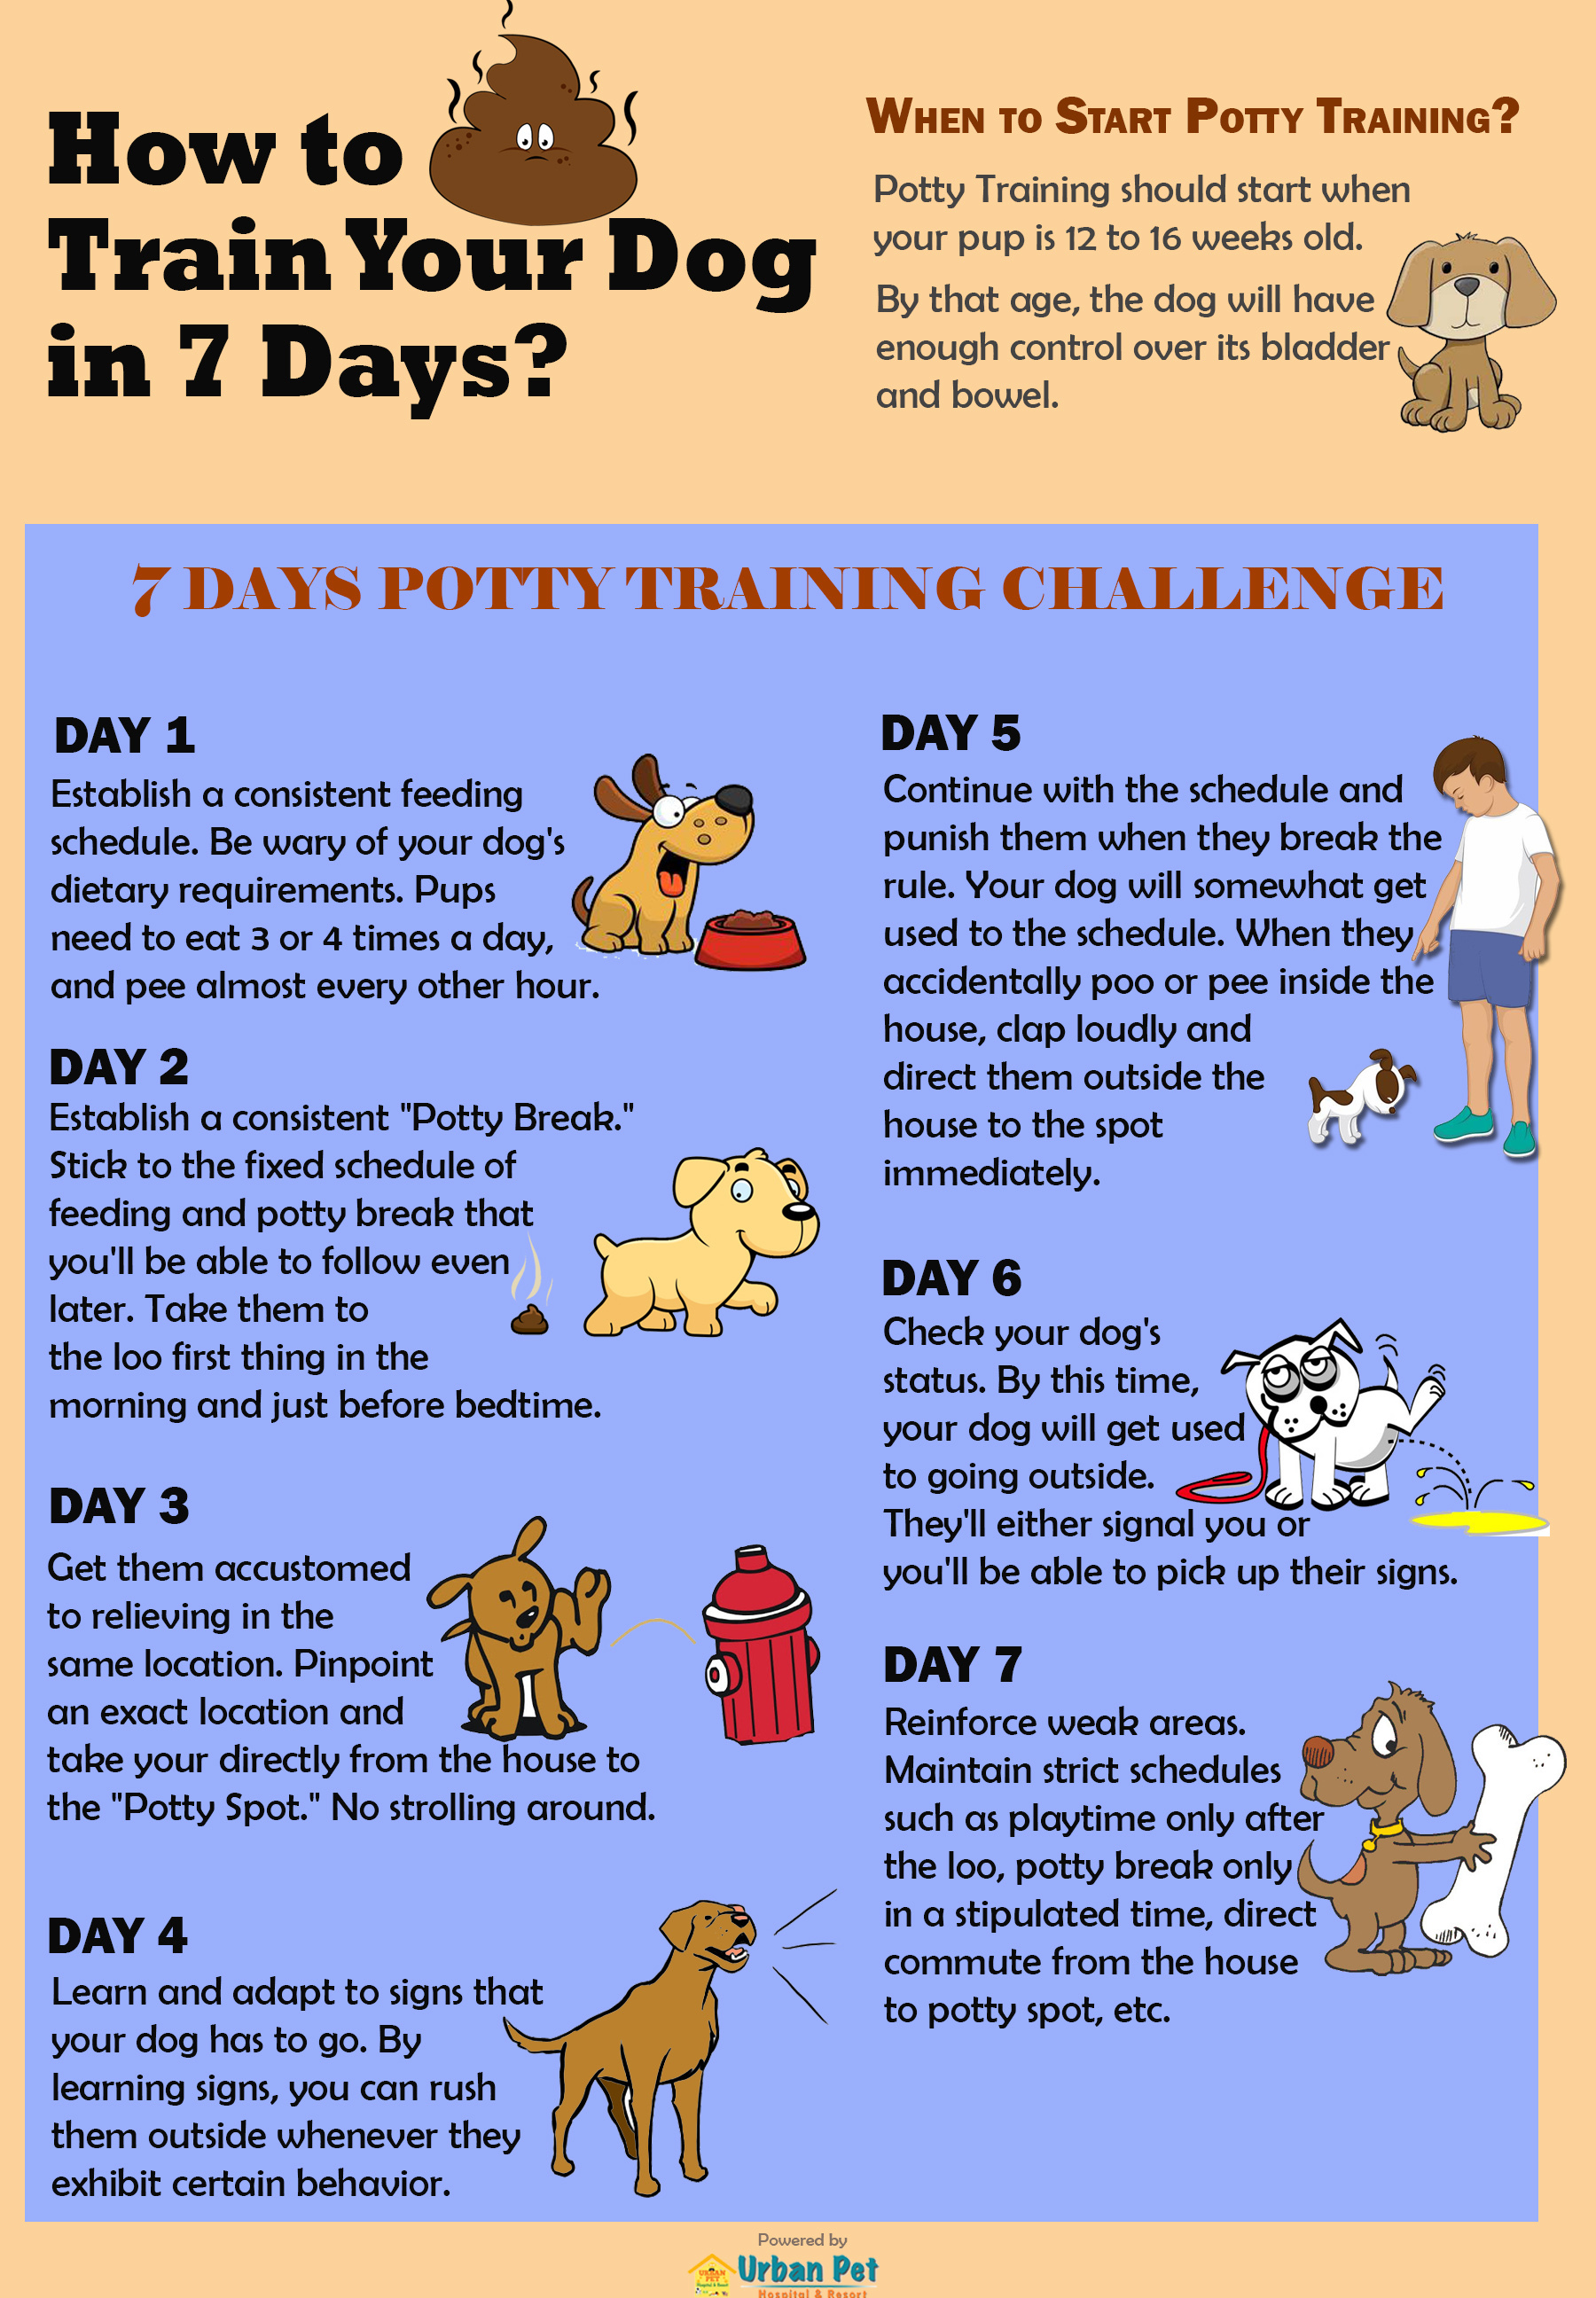 How Do I Potty Train My Puppy? – The Dog Training Guides